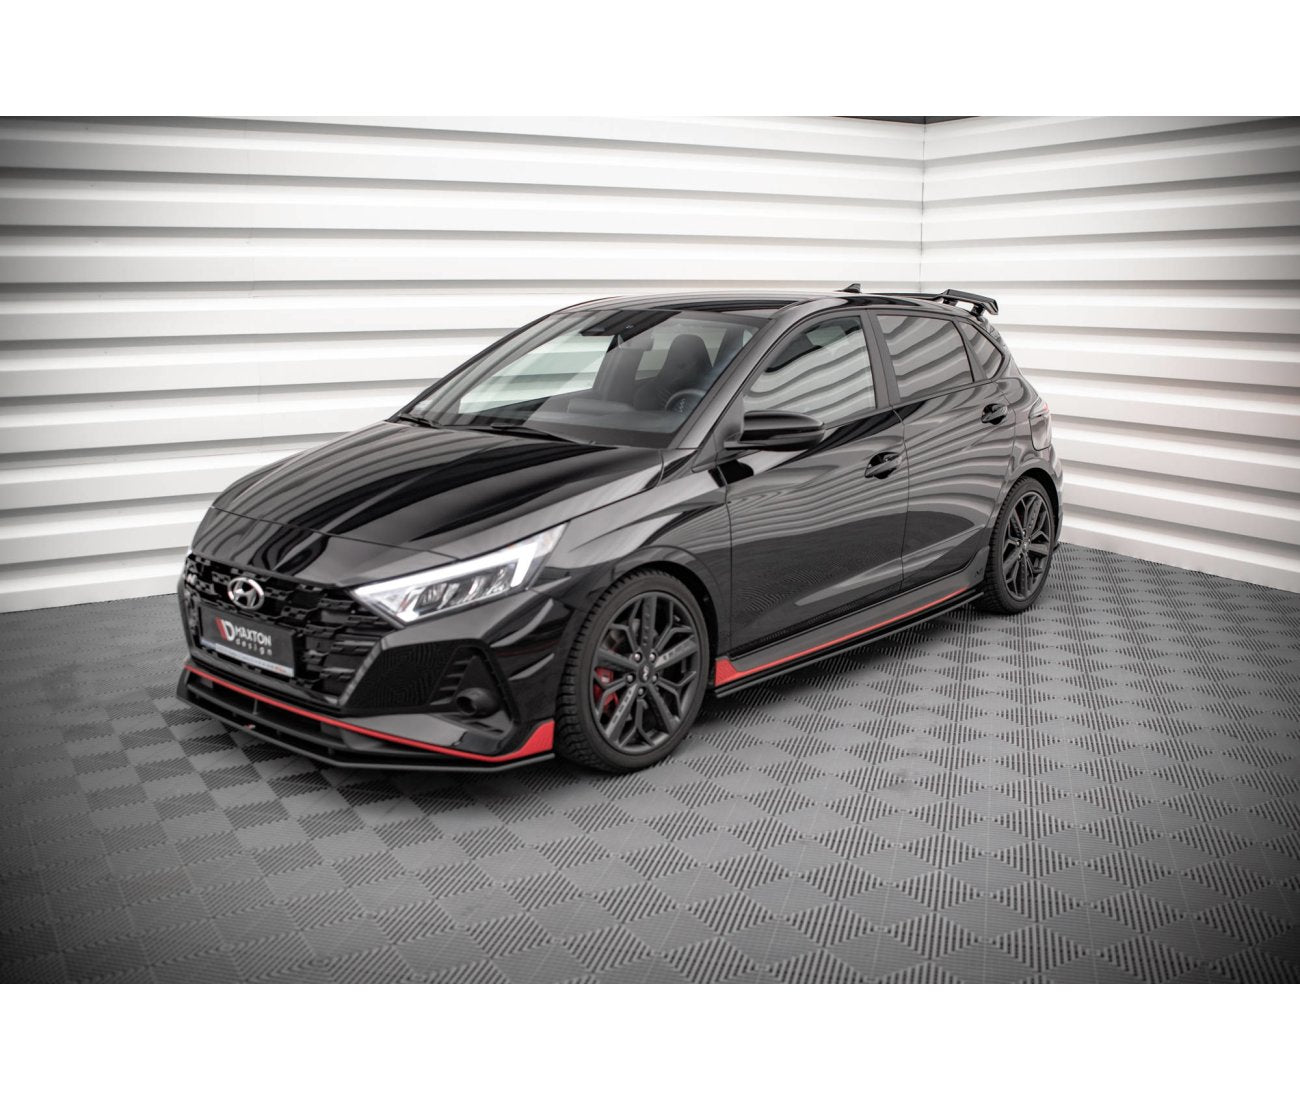 Street Pro Cup side skirts for Hyundai I20N